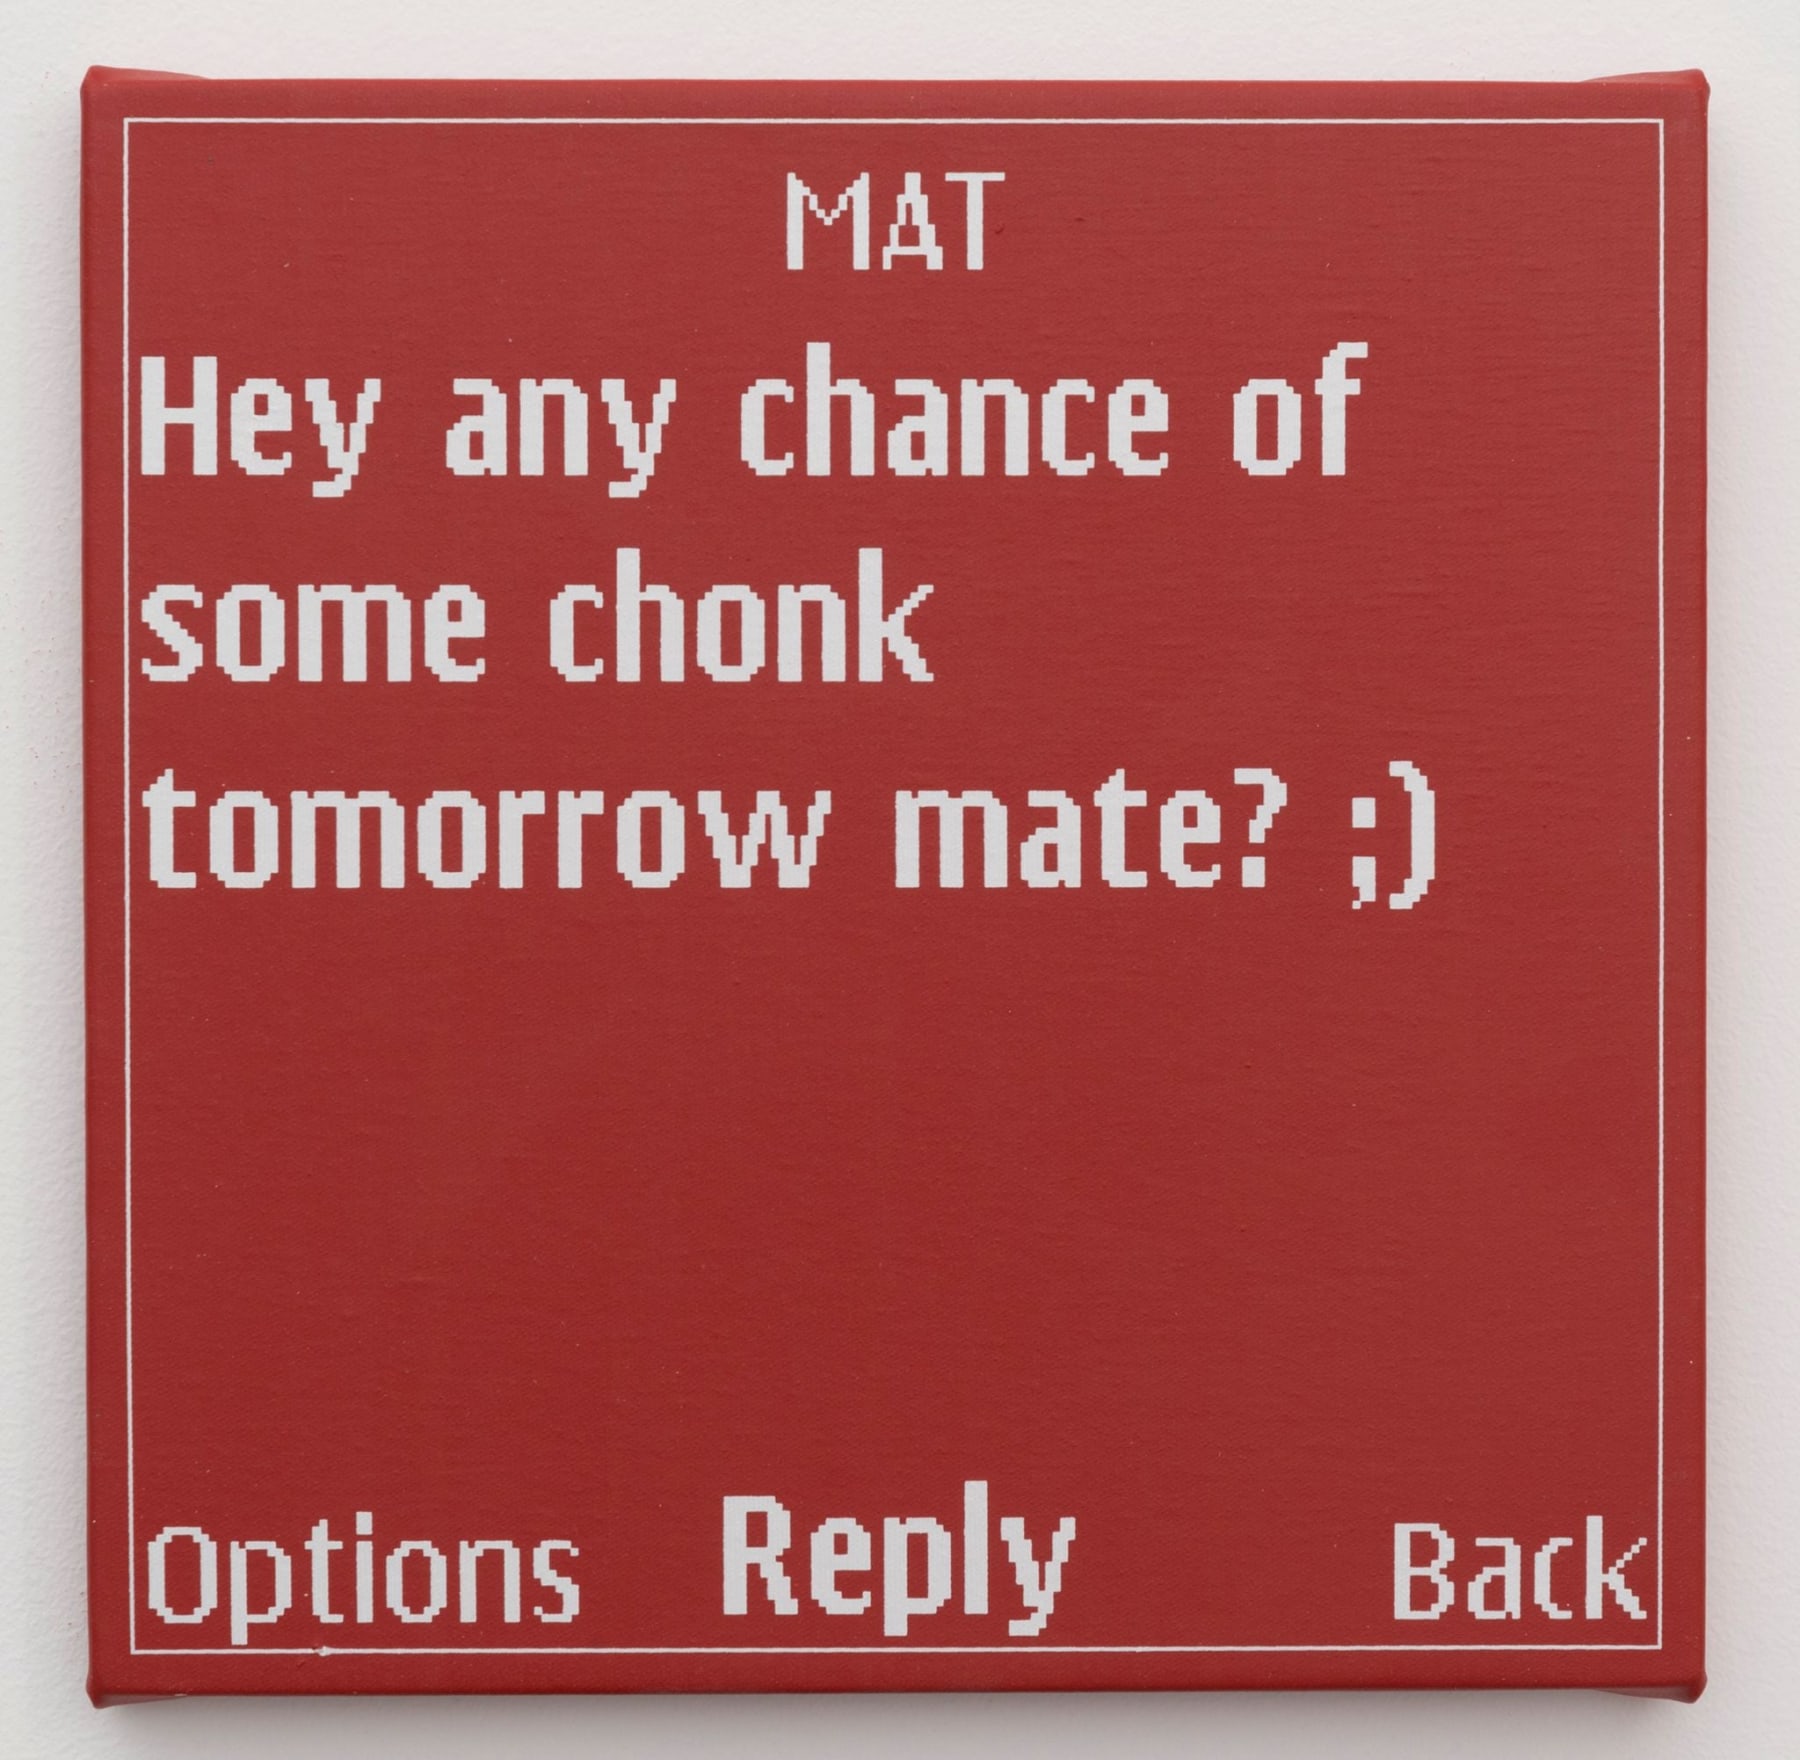 Adam McEwen, acrylic painting showing text message on red